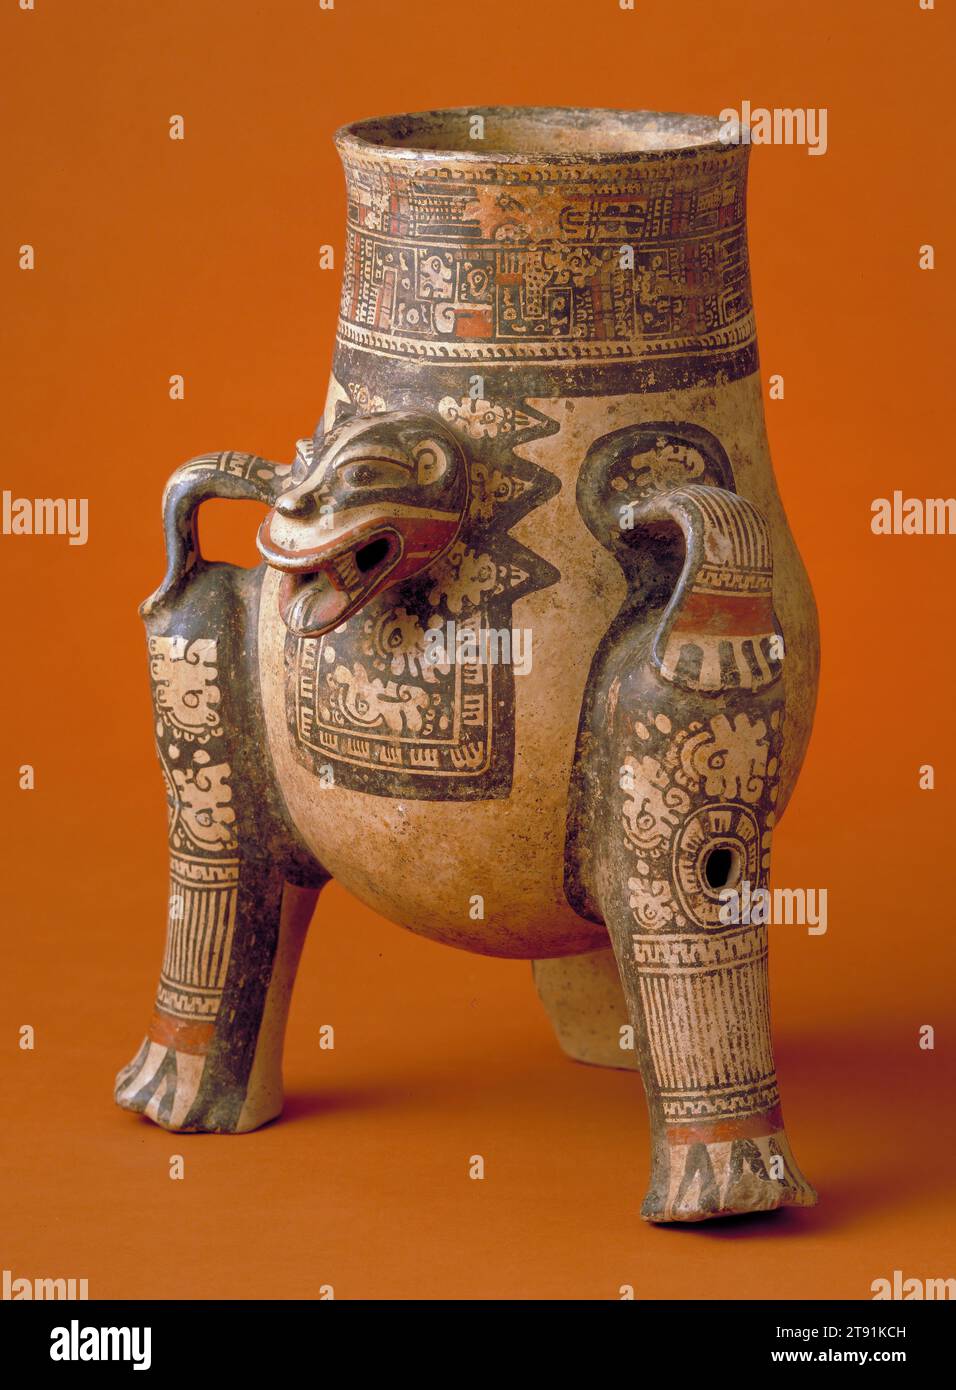 Vessel, c. 1100 - 1200 CE, 14 1/2 x 10 1/4 in. (36.83 x 26.04 cm), Clay, pigments, Costa Rica, 12th-13th century, Jaguar effigy jars are a classic form of ancient Costa Rican art. Shaped into the representation of a sun-devouring feline god, the vessel is covered with colorful painted designs that refer not only to the jaguar, but also to celestial elements such as the sun and stars. The legs of these jars were usually hollow, with clay balls inserted to make them rattle Stock Photo